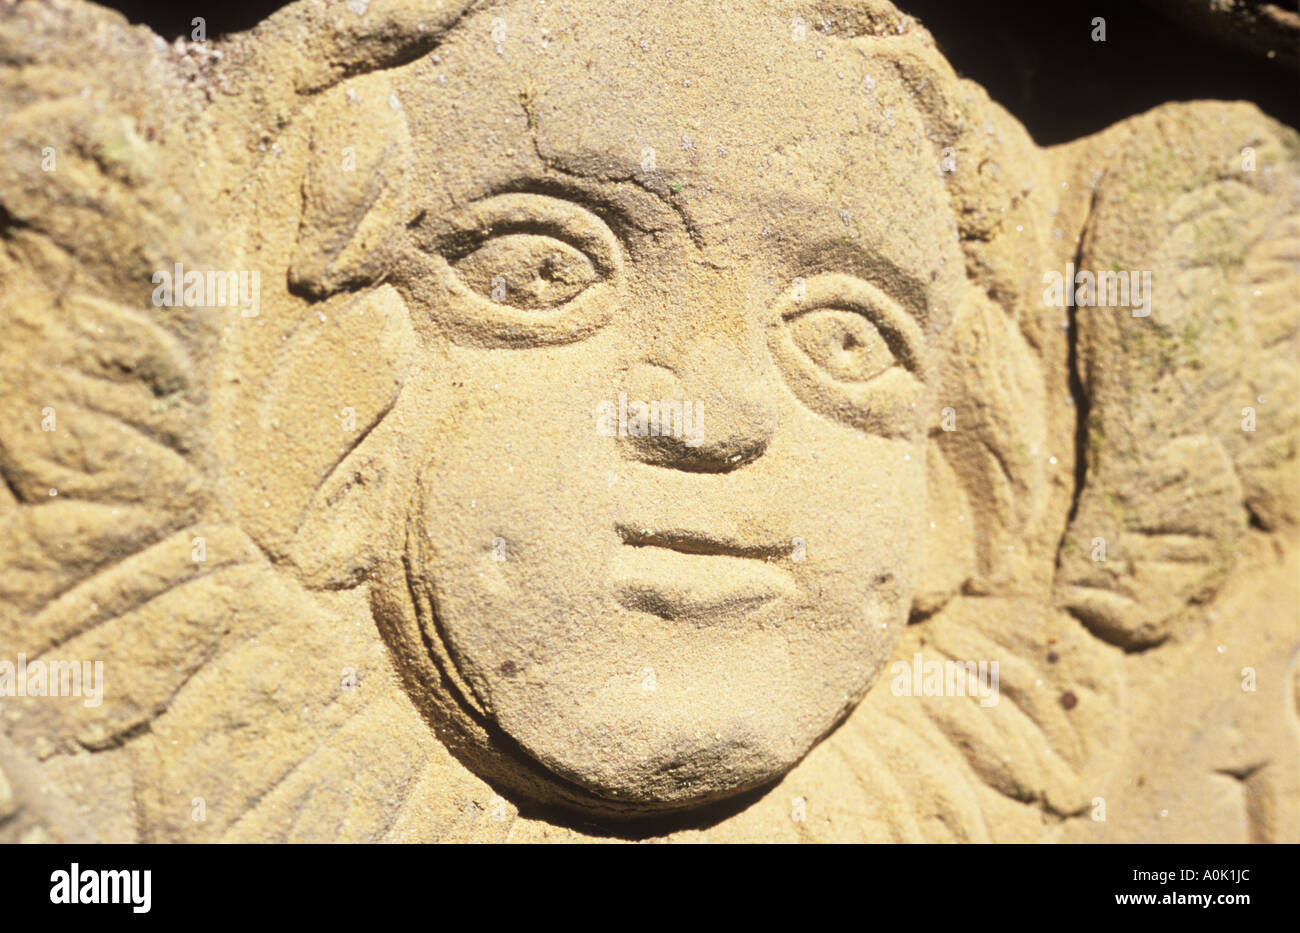 Close up detail of a naive carved face in sandstone worn and cracked through weathering Stock Photo